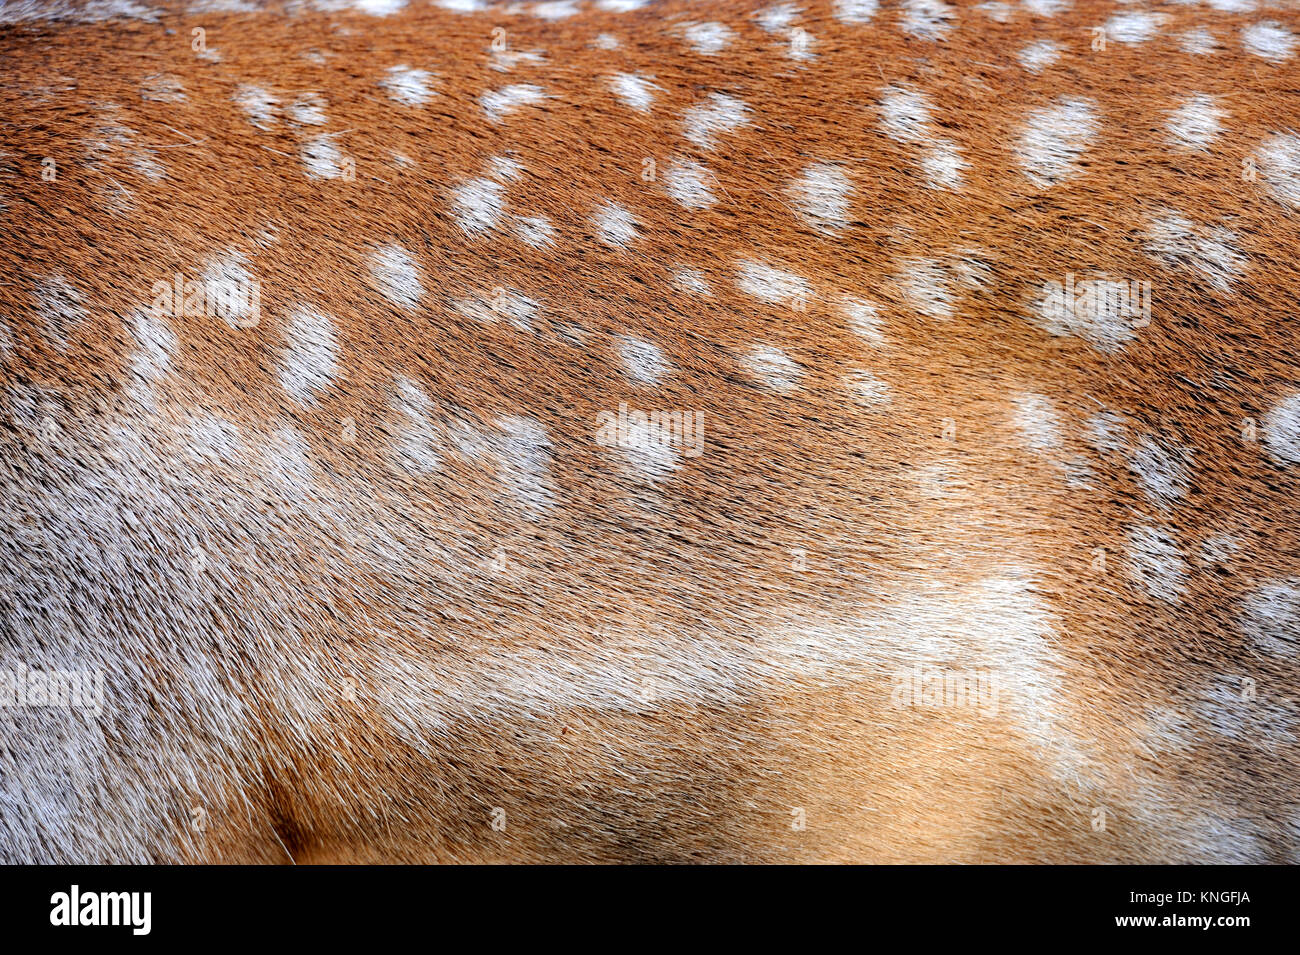 Texture Of Real Axis Sika Deer Fur Stock Photo Alamy